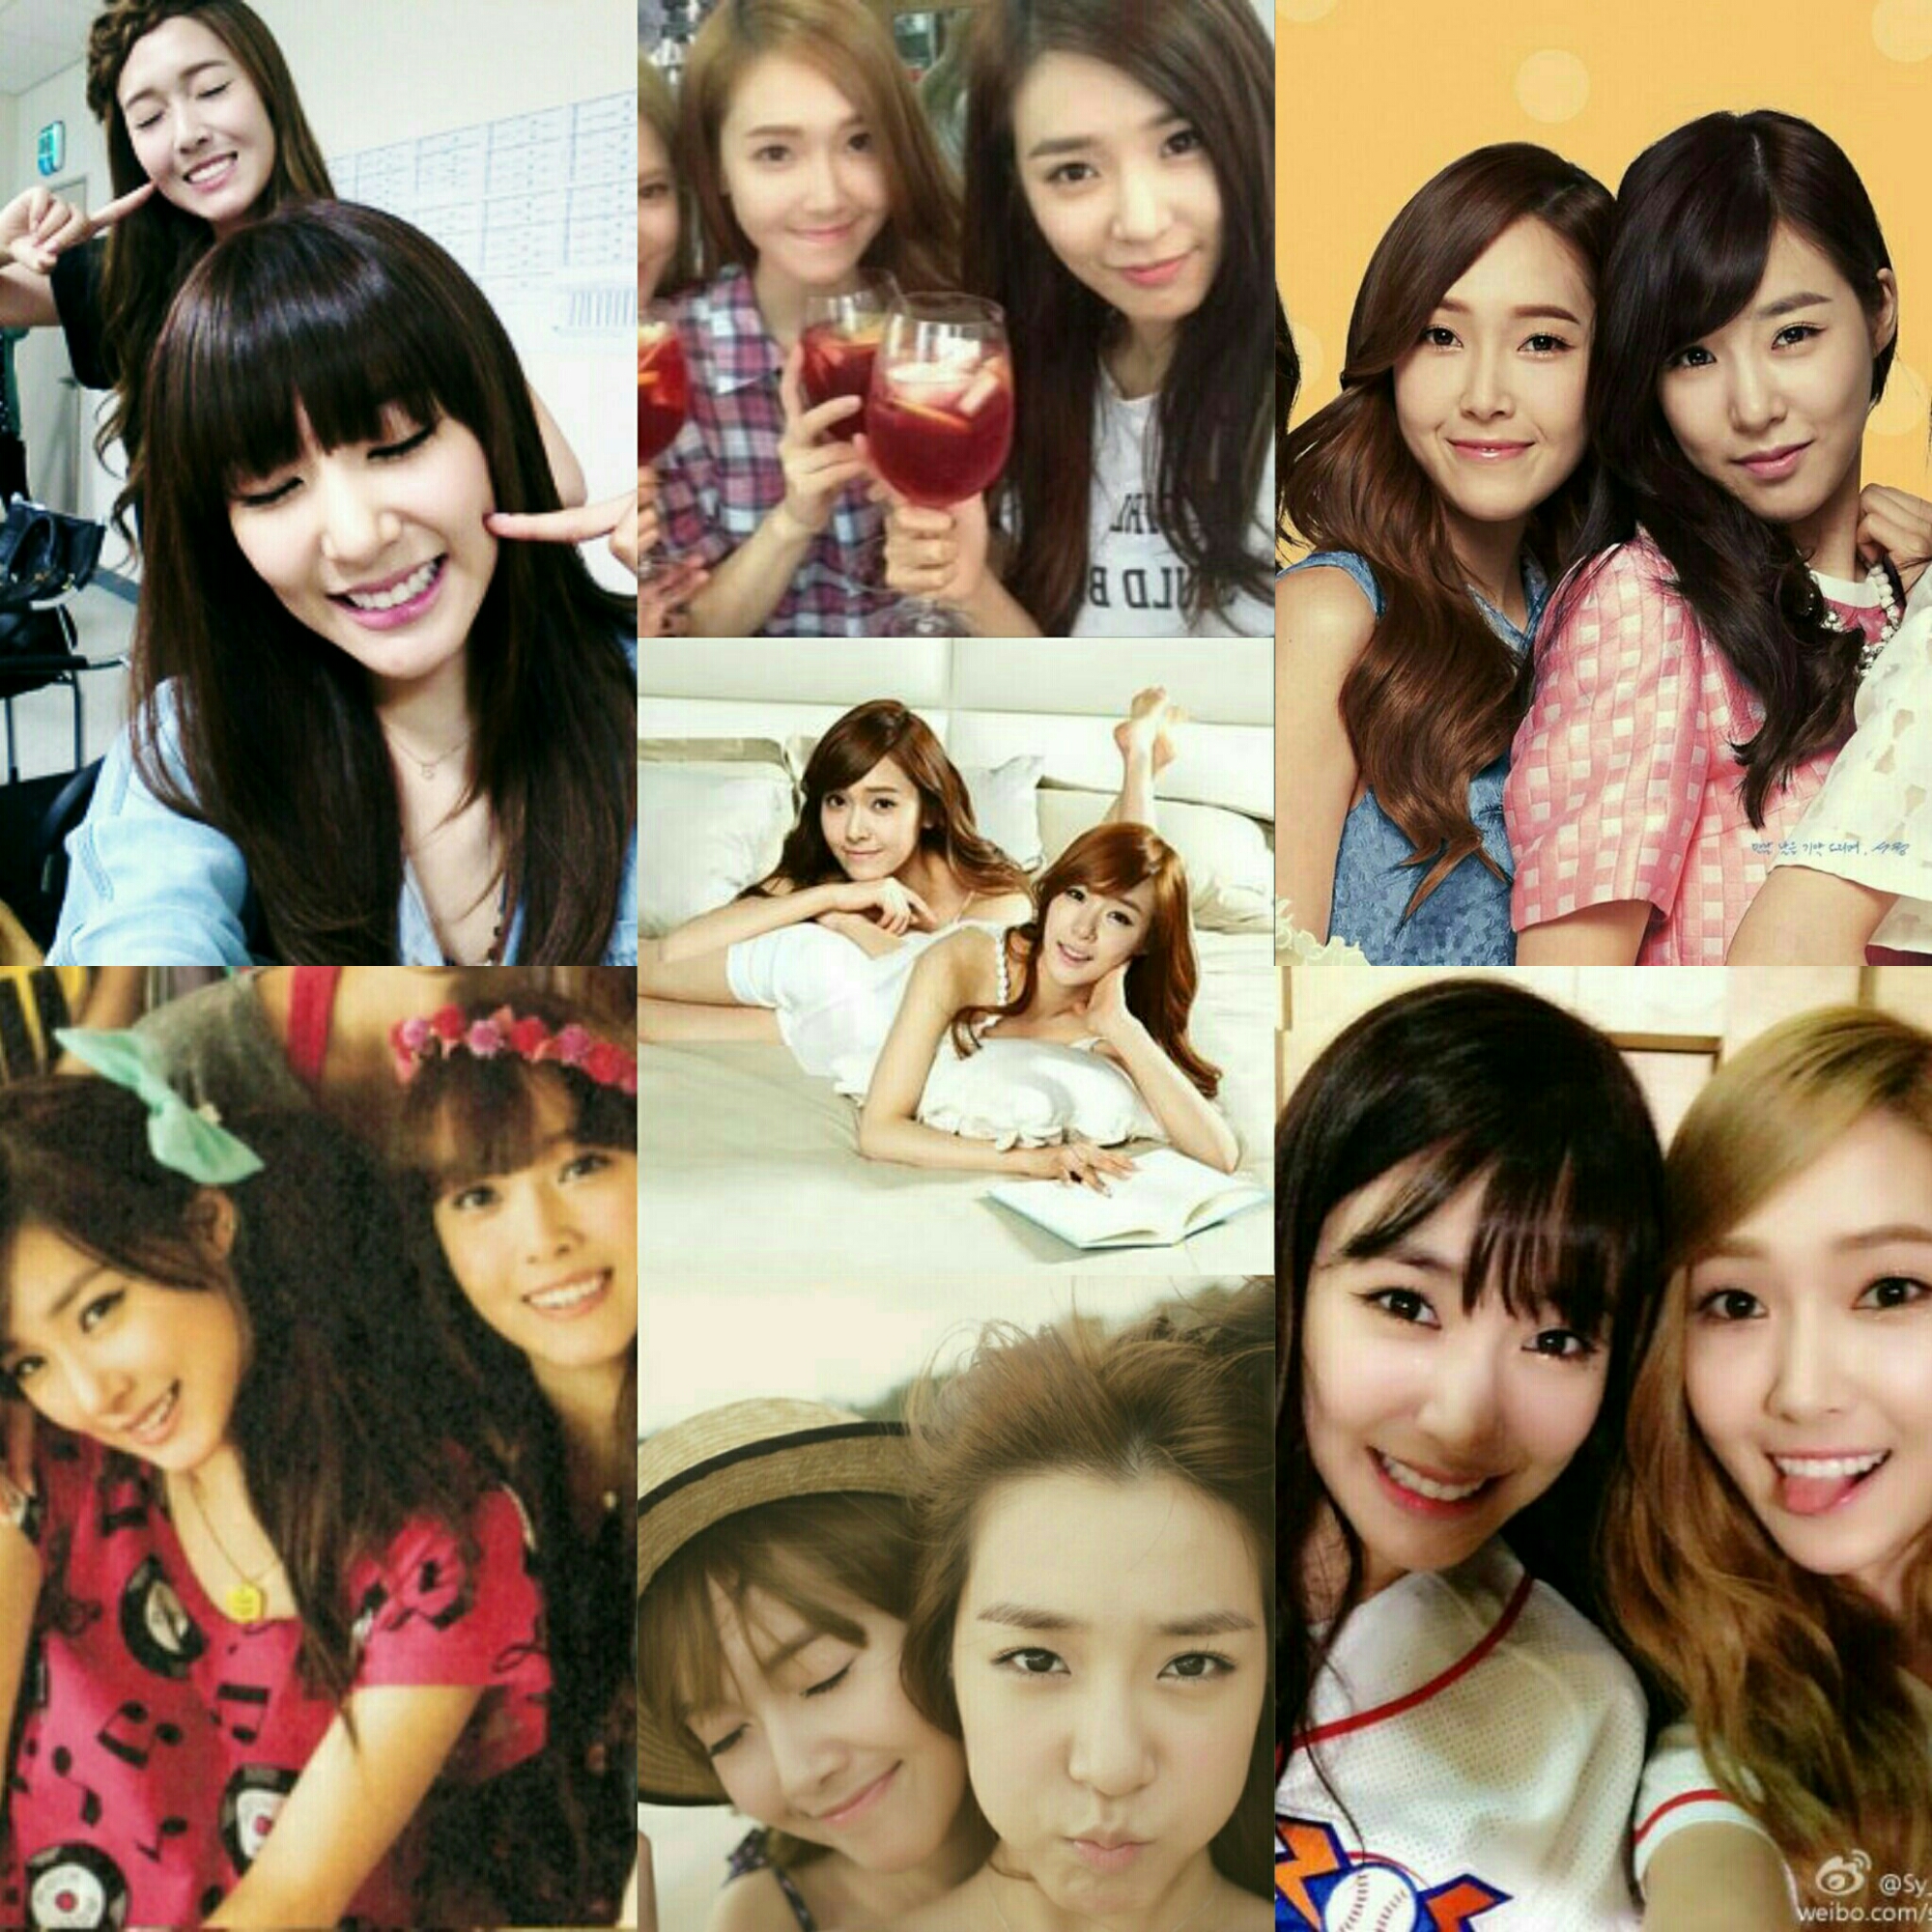 Yultae Welcome To My Snsd World